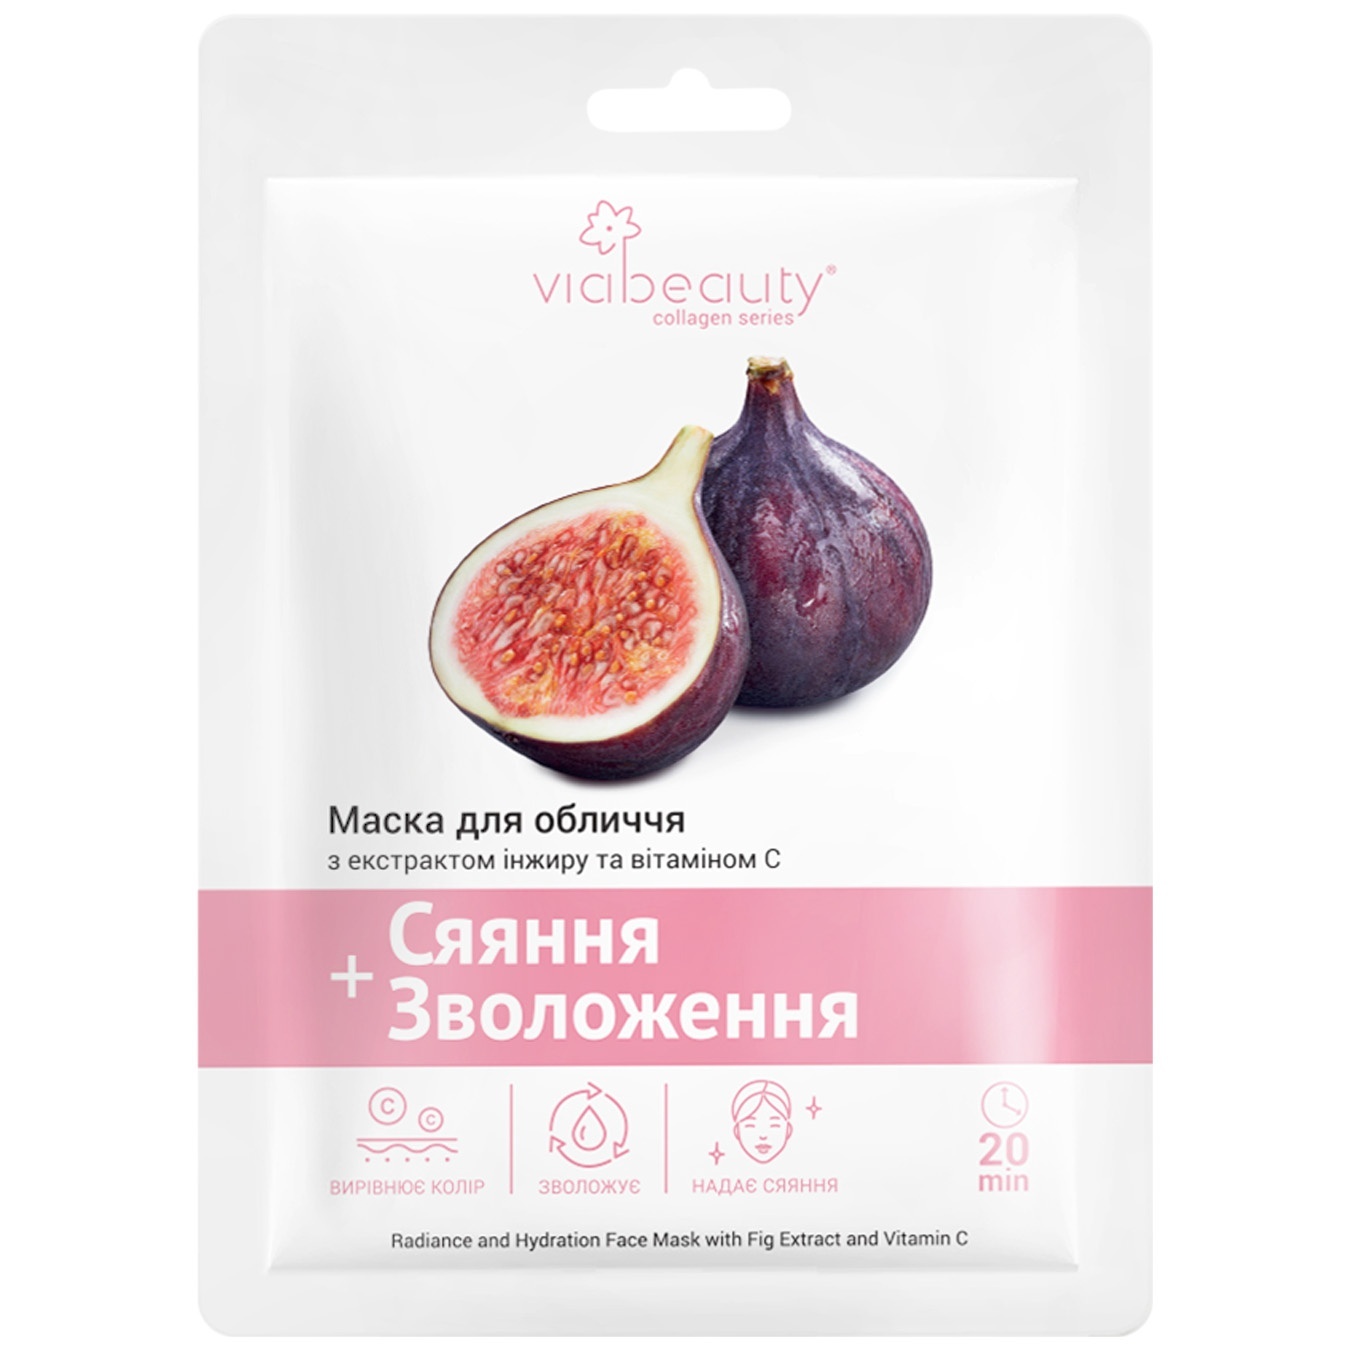 VIABEAUTY fabric face mask with fig extract and vitamin C for radiance and hydration